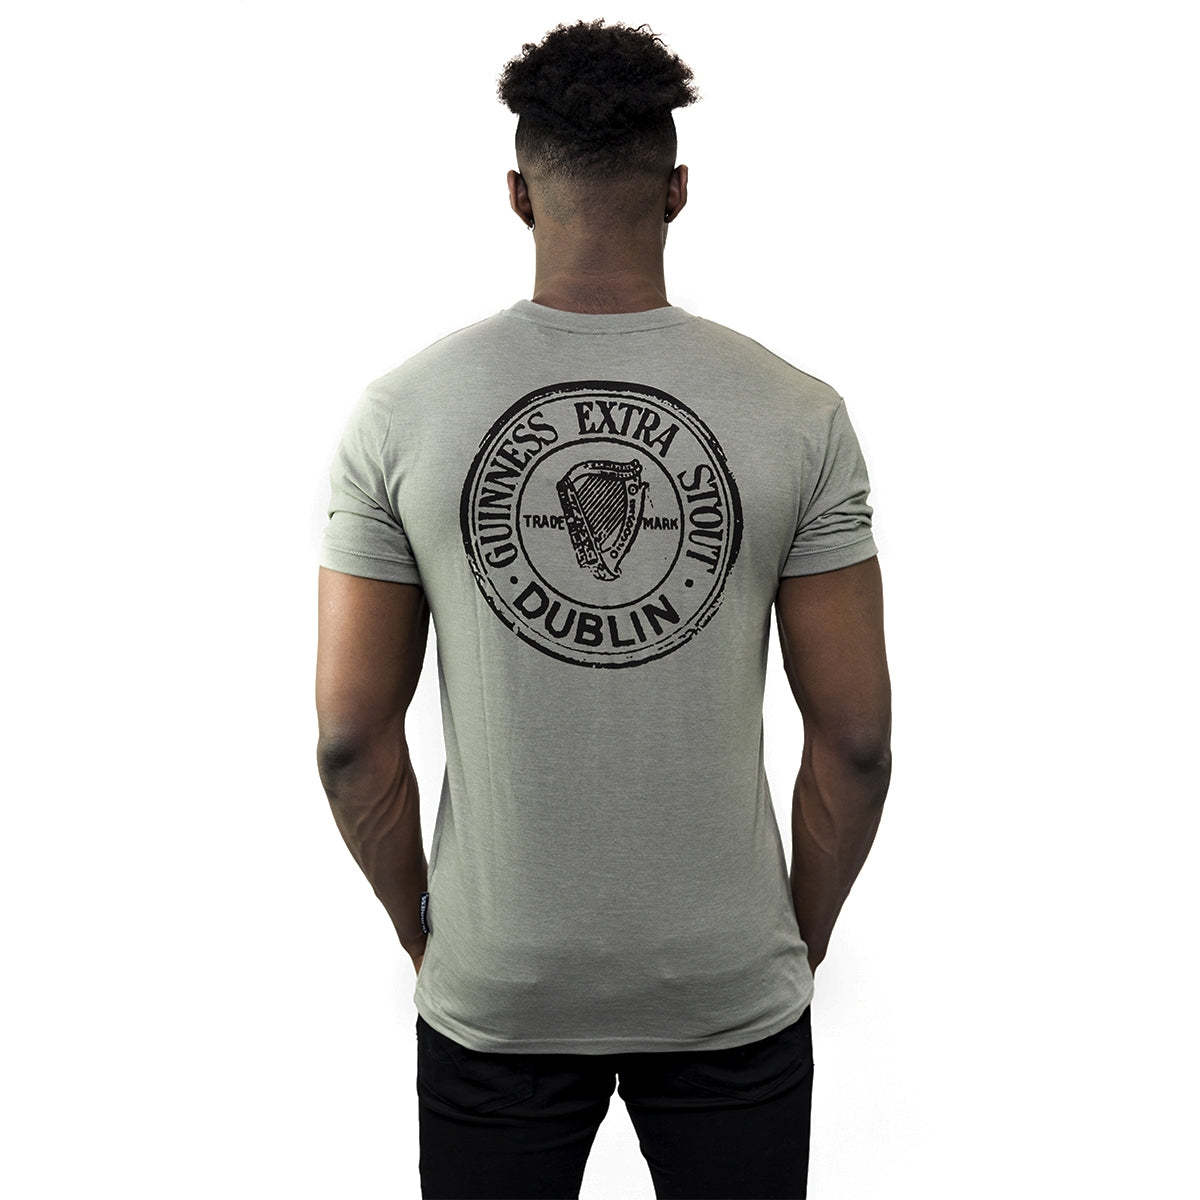 The man's back is visible as he wears a Guinness Green Heathered Bottle Cap T-Shirt made from a cotton blend fabric.